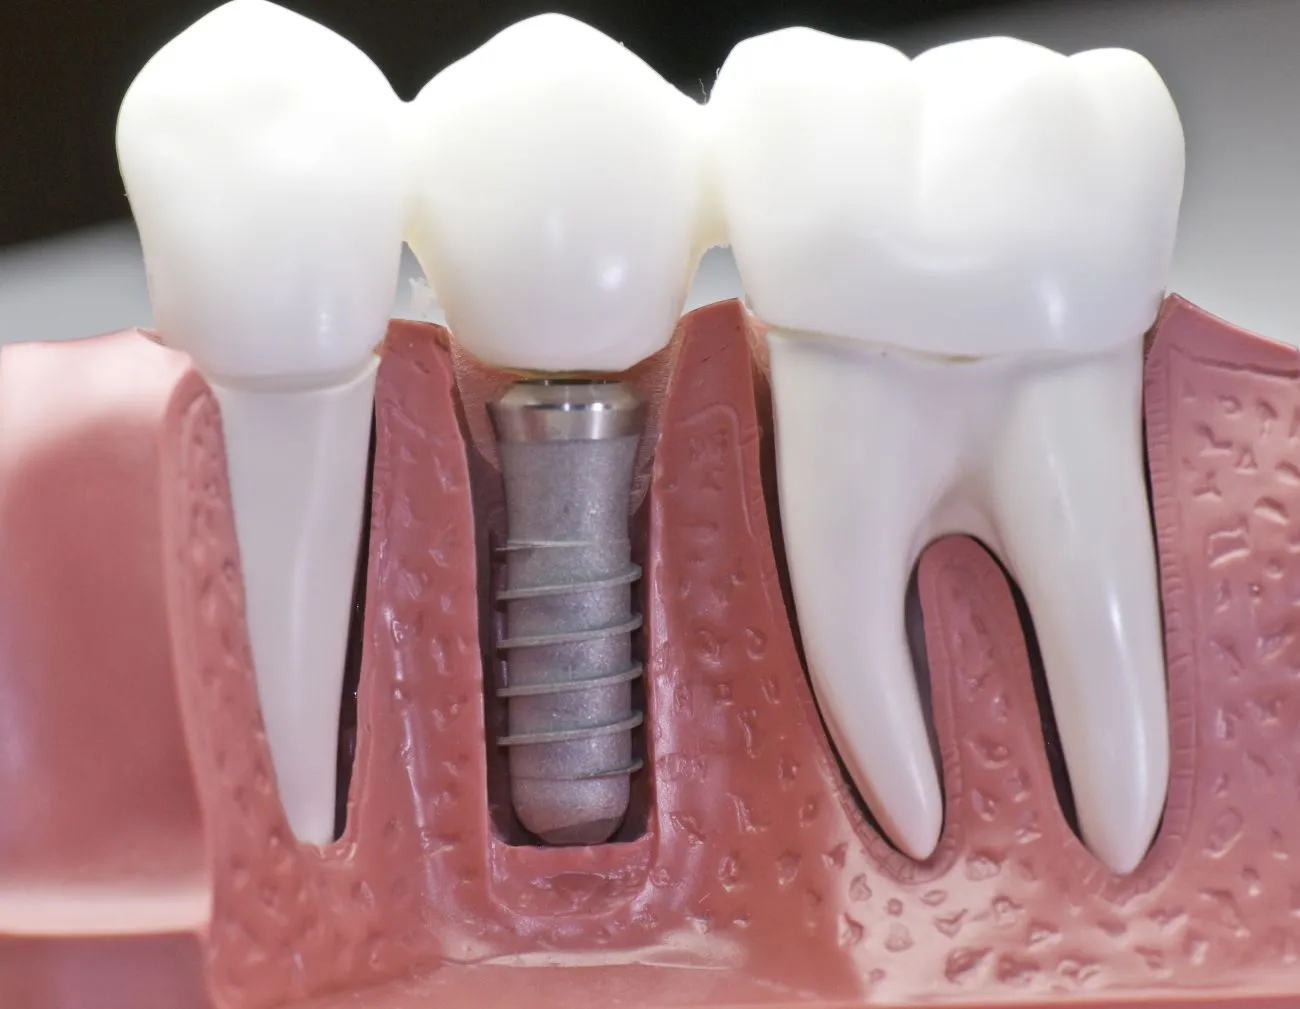 A Concise Guide to Dental Implants